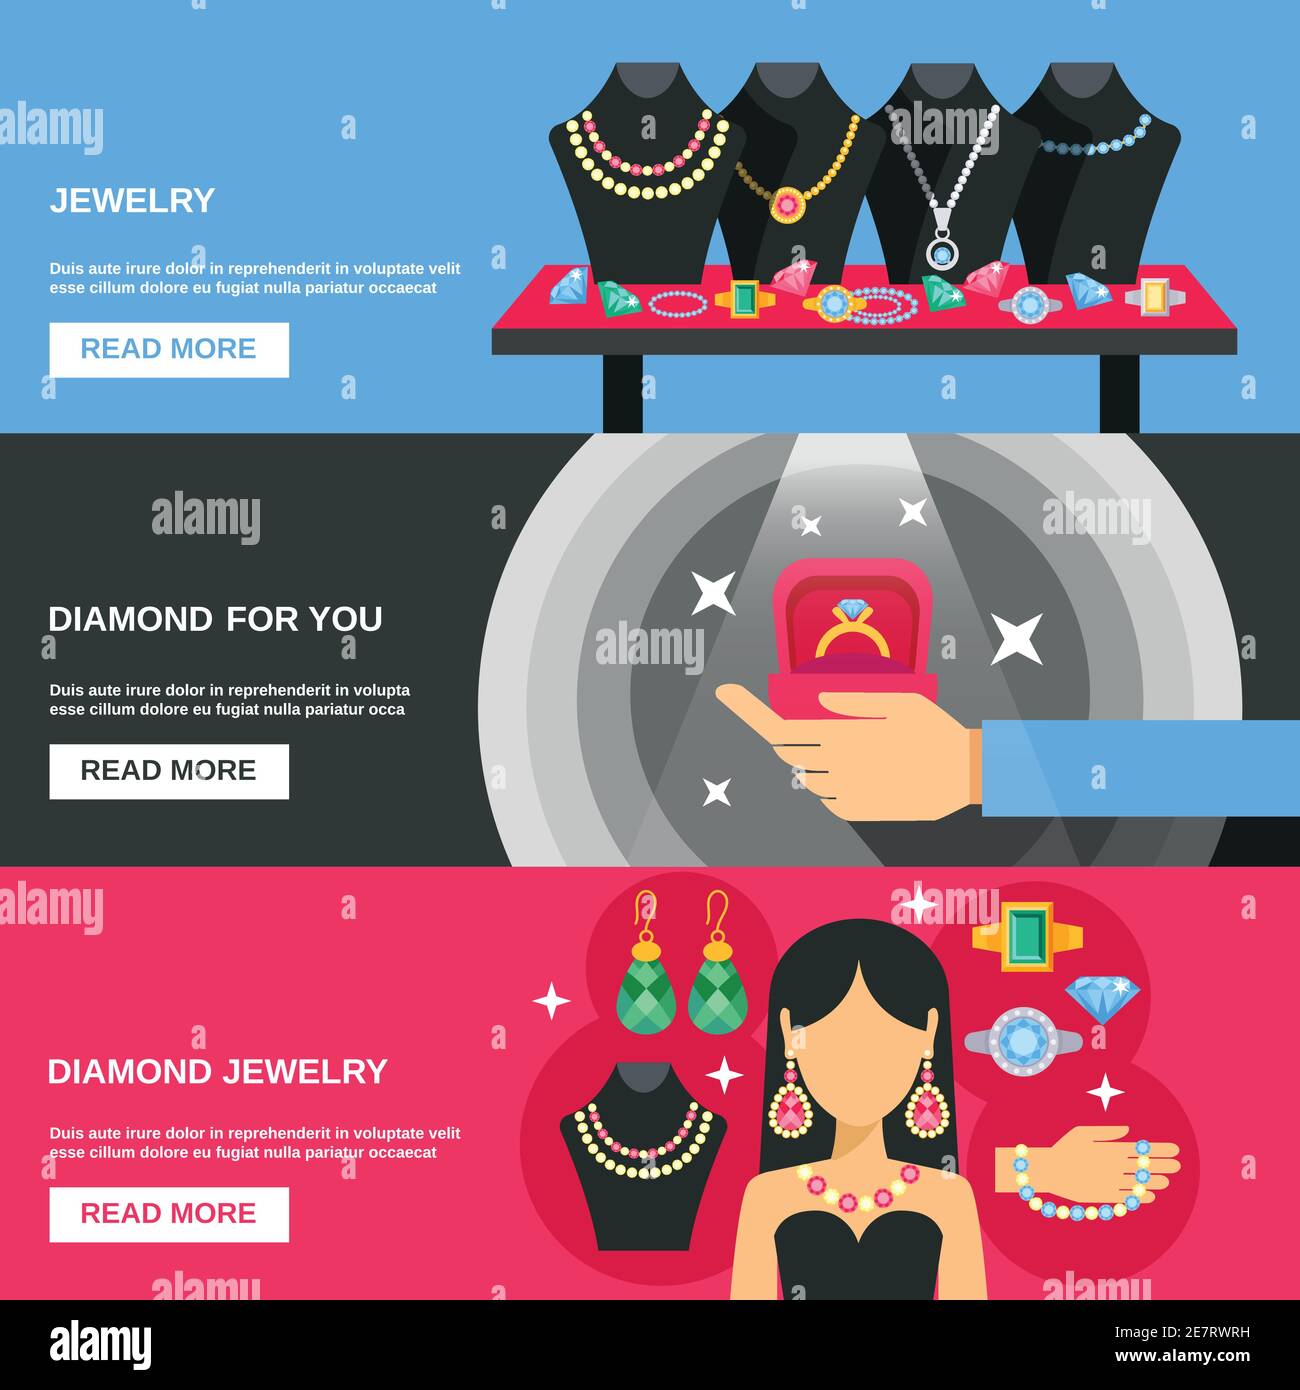 Flat design pawnshop and jewelry showcase Vector Image